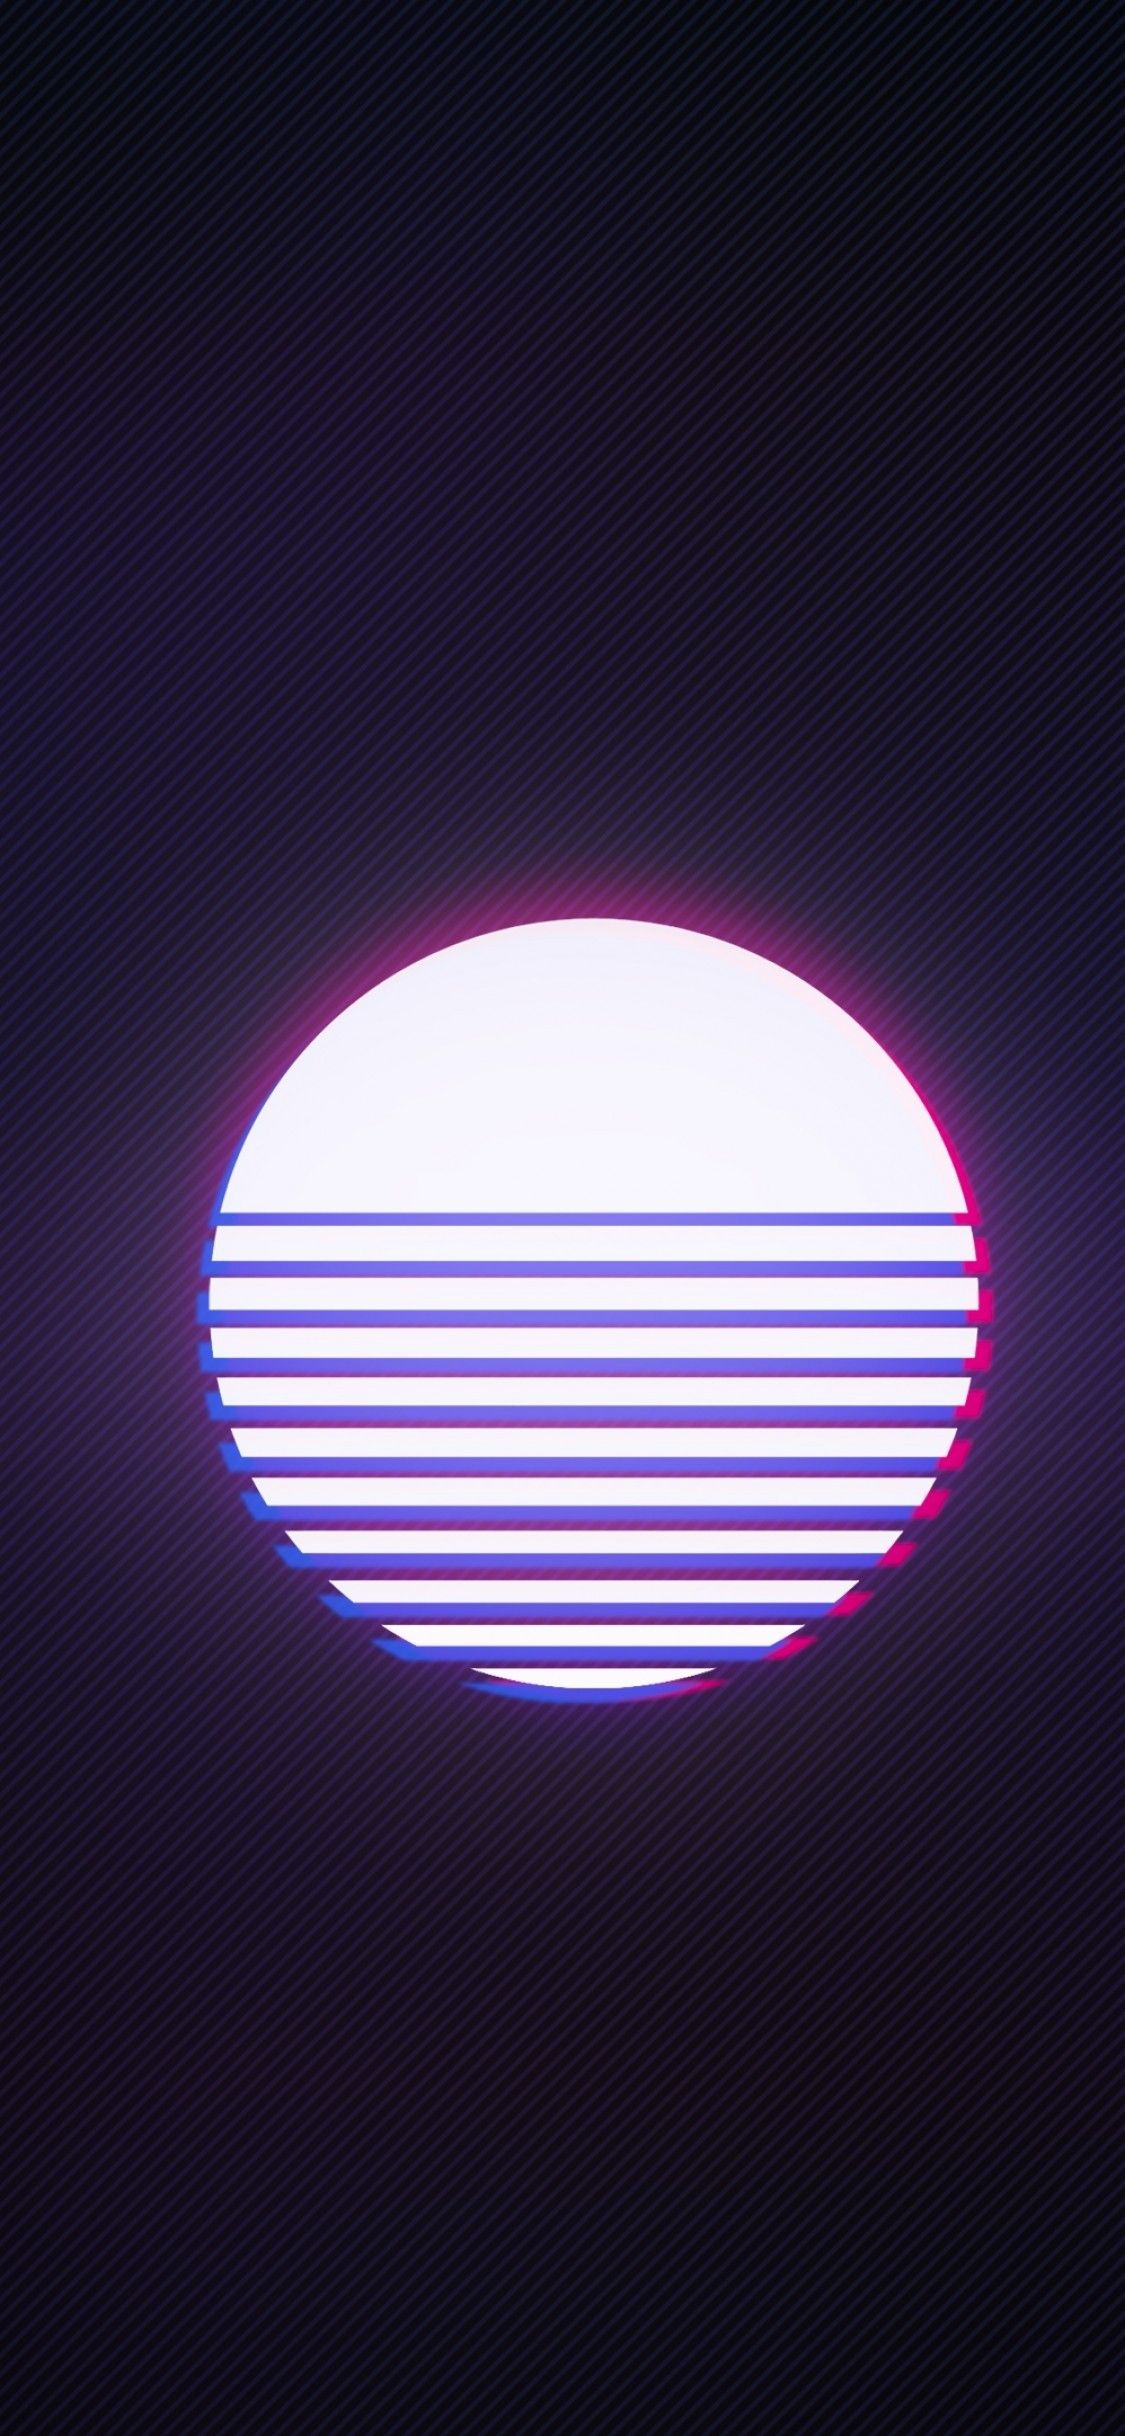 Download 1125x2436 Sun, Retro Wave, Synthwave, Music Wallpaper